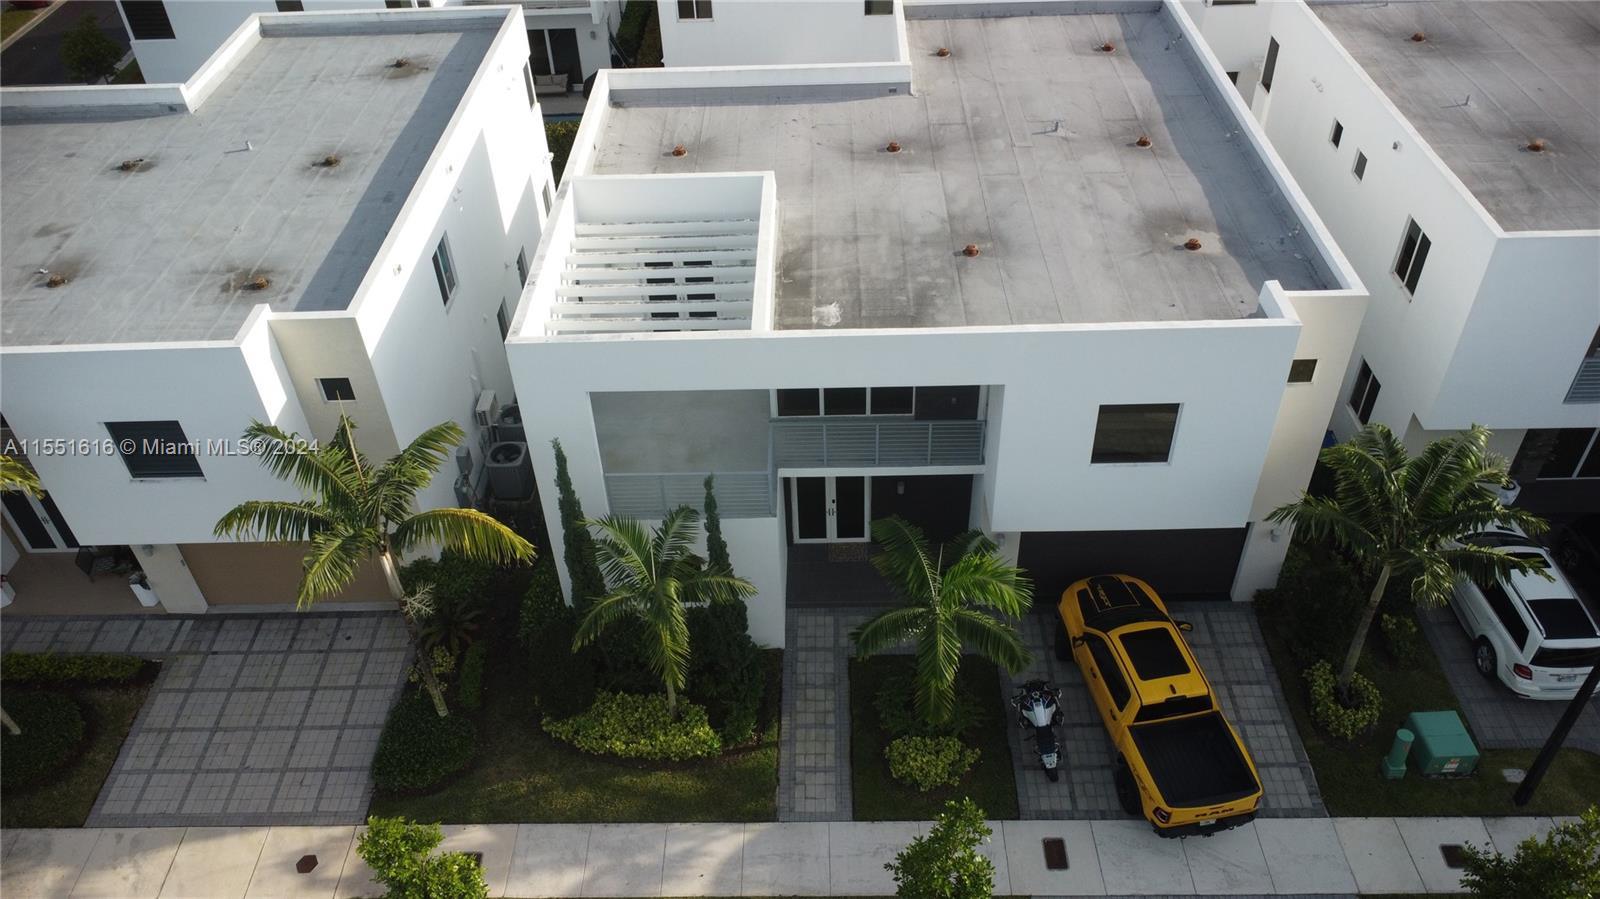 Amazing Modern Doral 2 Floor House With Pool. Located close to Commercial areas and Parks. Well main